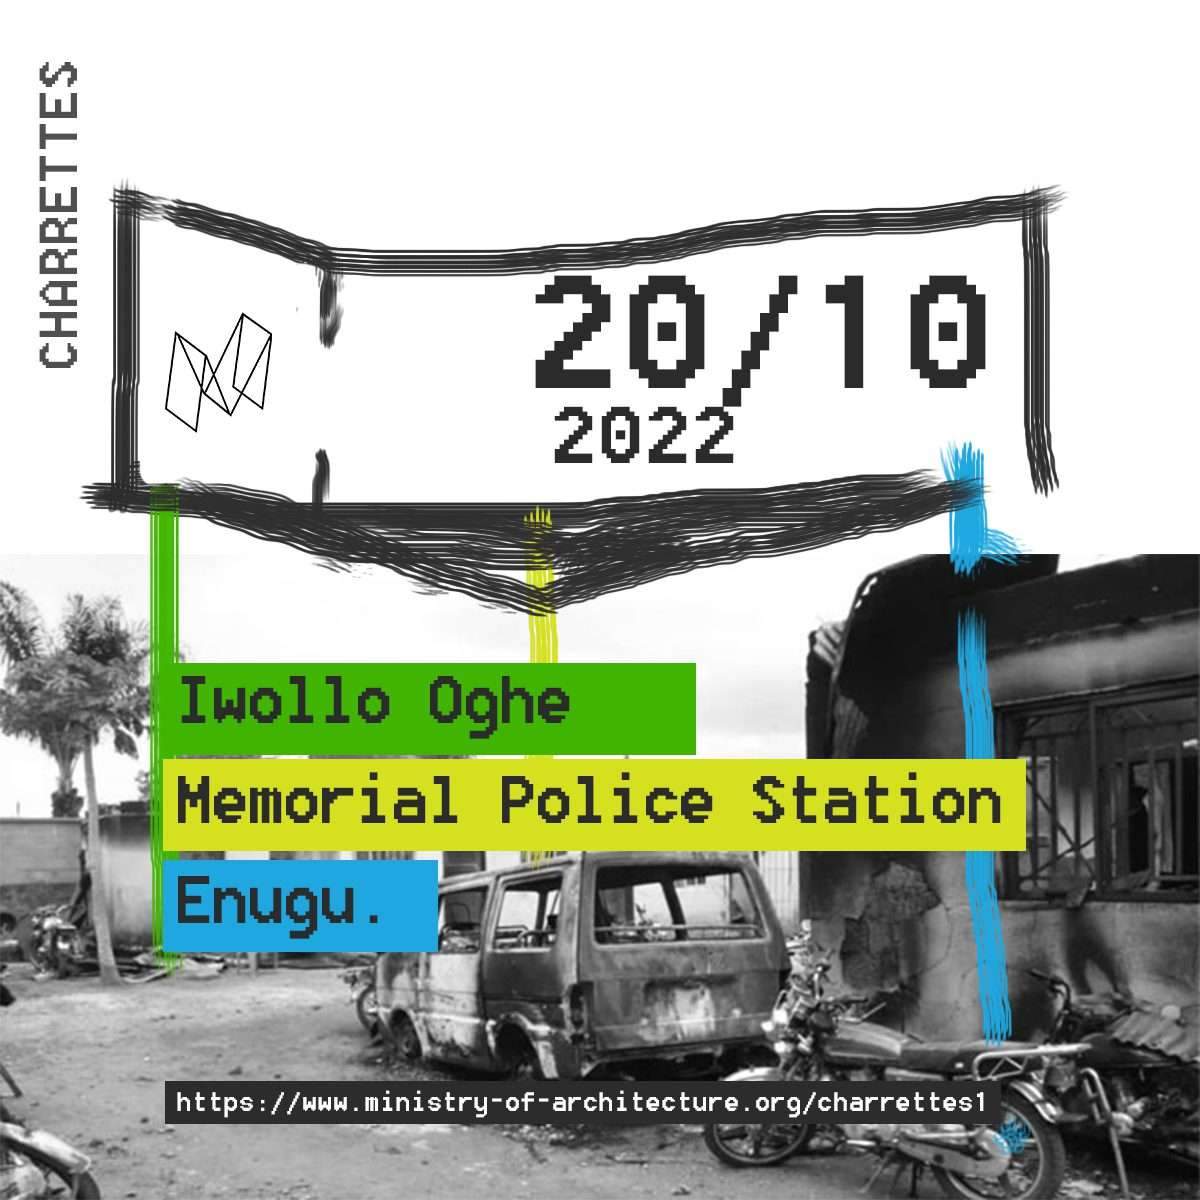 20.10.20: Iwollo Oghe Memorial Police Station